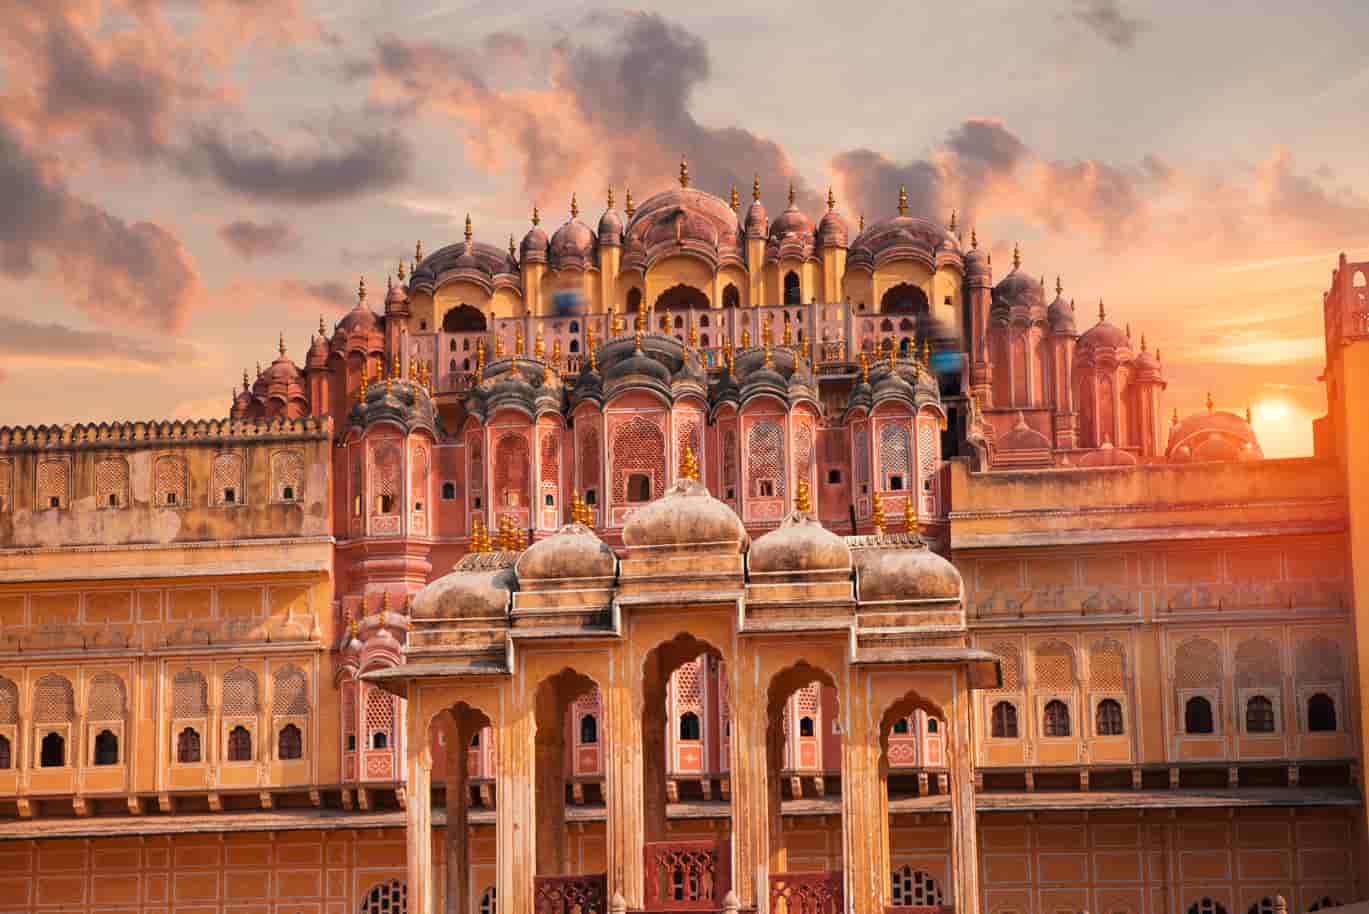 Jaipur – The Pink City Filled With Beauty and Splendour